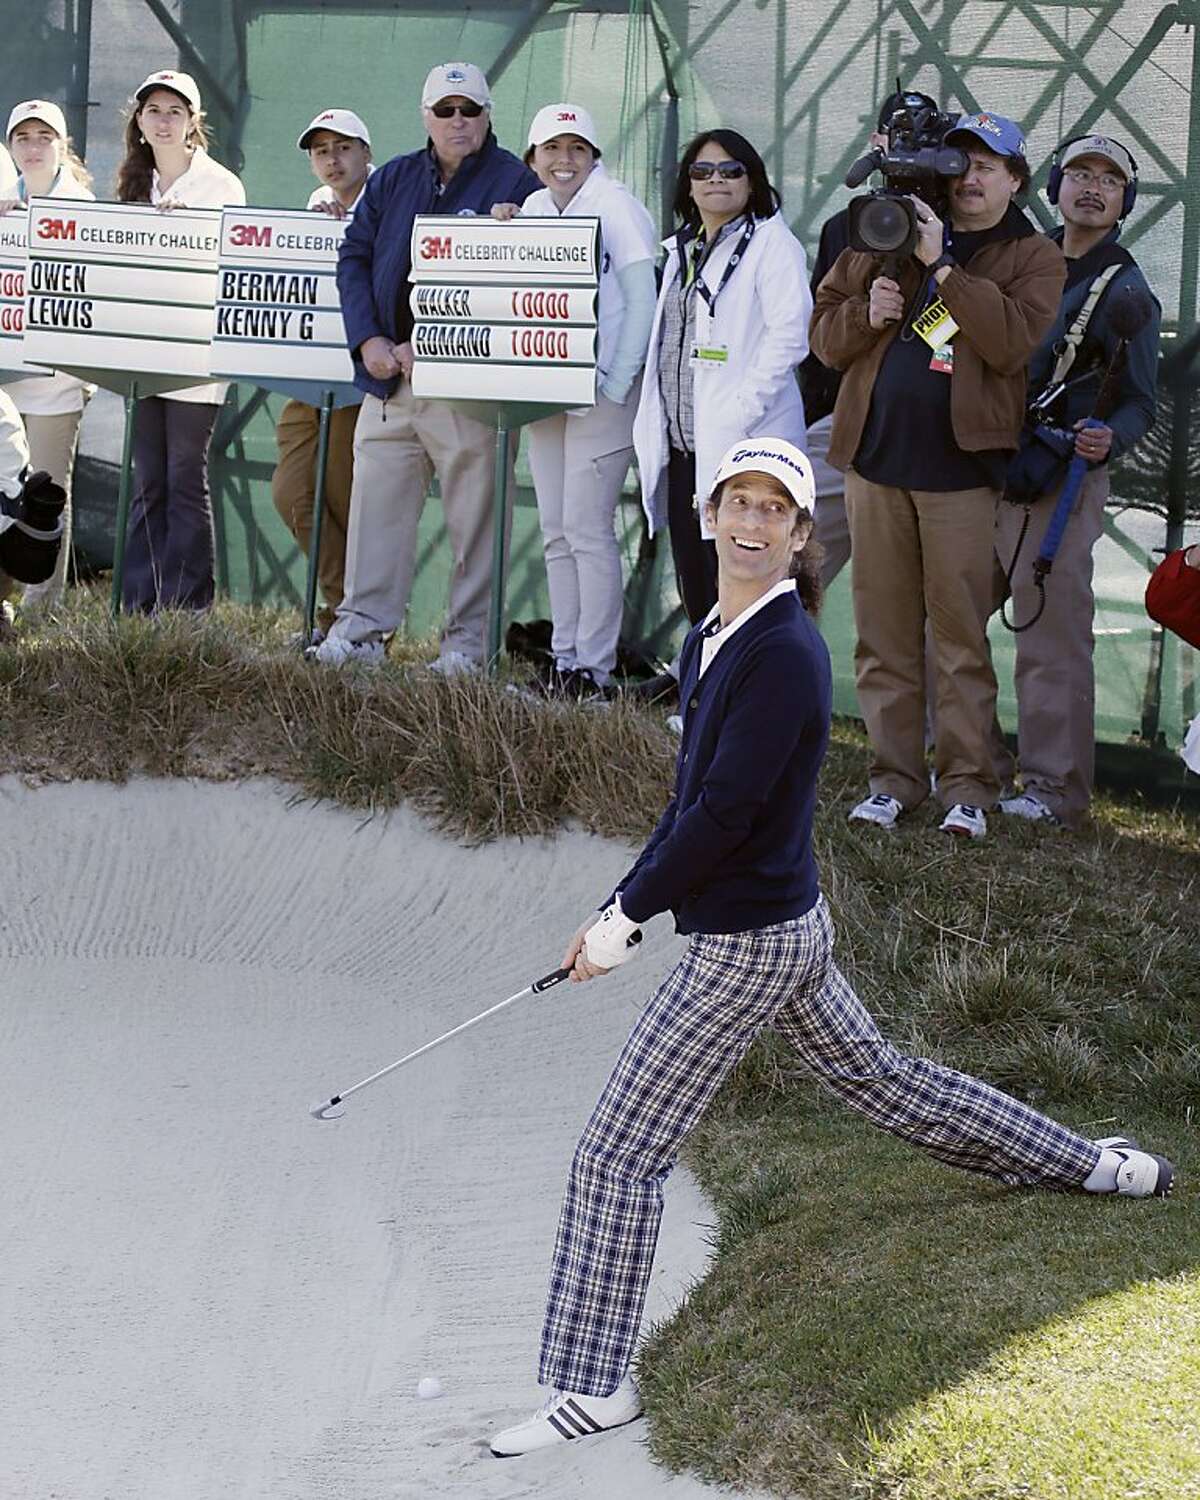 Musician Kenny G prepares to hit out of a bunker onto the 17th green of the Pebble Beach Golf Links during the celebrity challenge event of the AT&T Pebble Beach Pro-Am golf tournament on Wednesday, Feb. 6, 2013, in Pebble Beach, Calif. (AP Photo/Ben Margot)